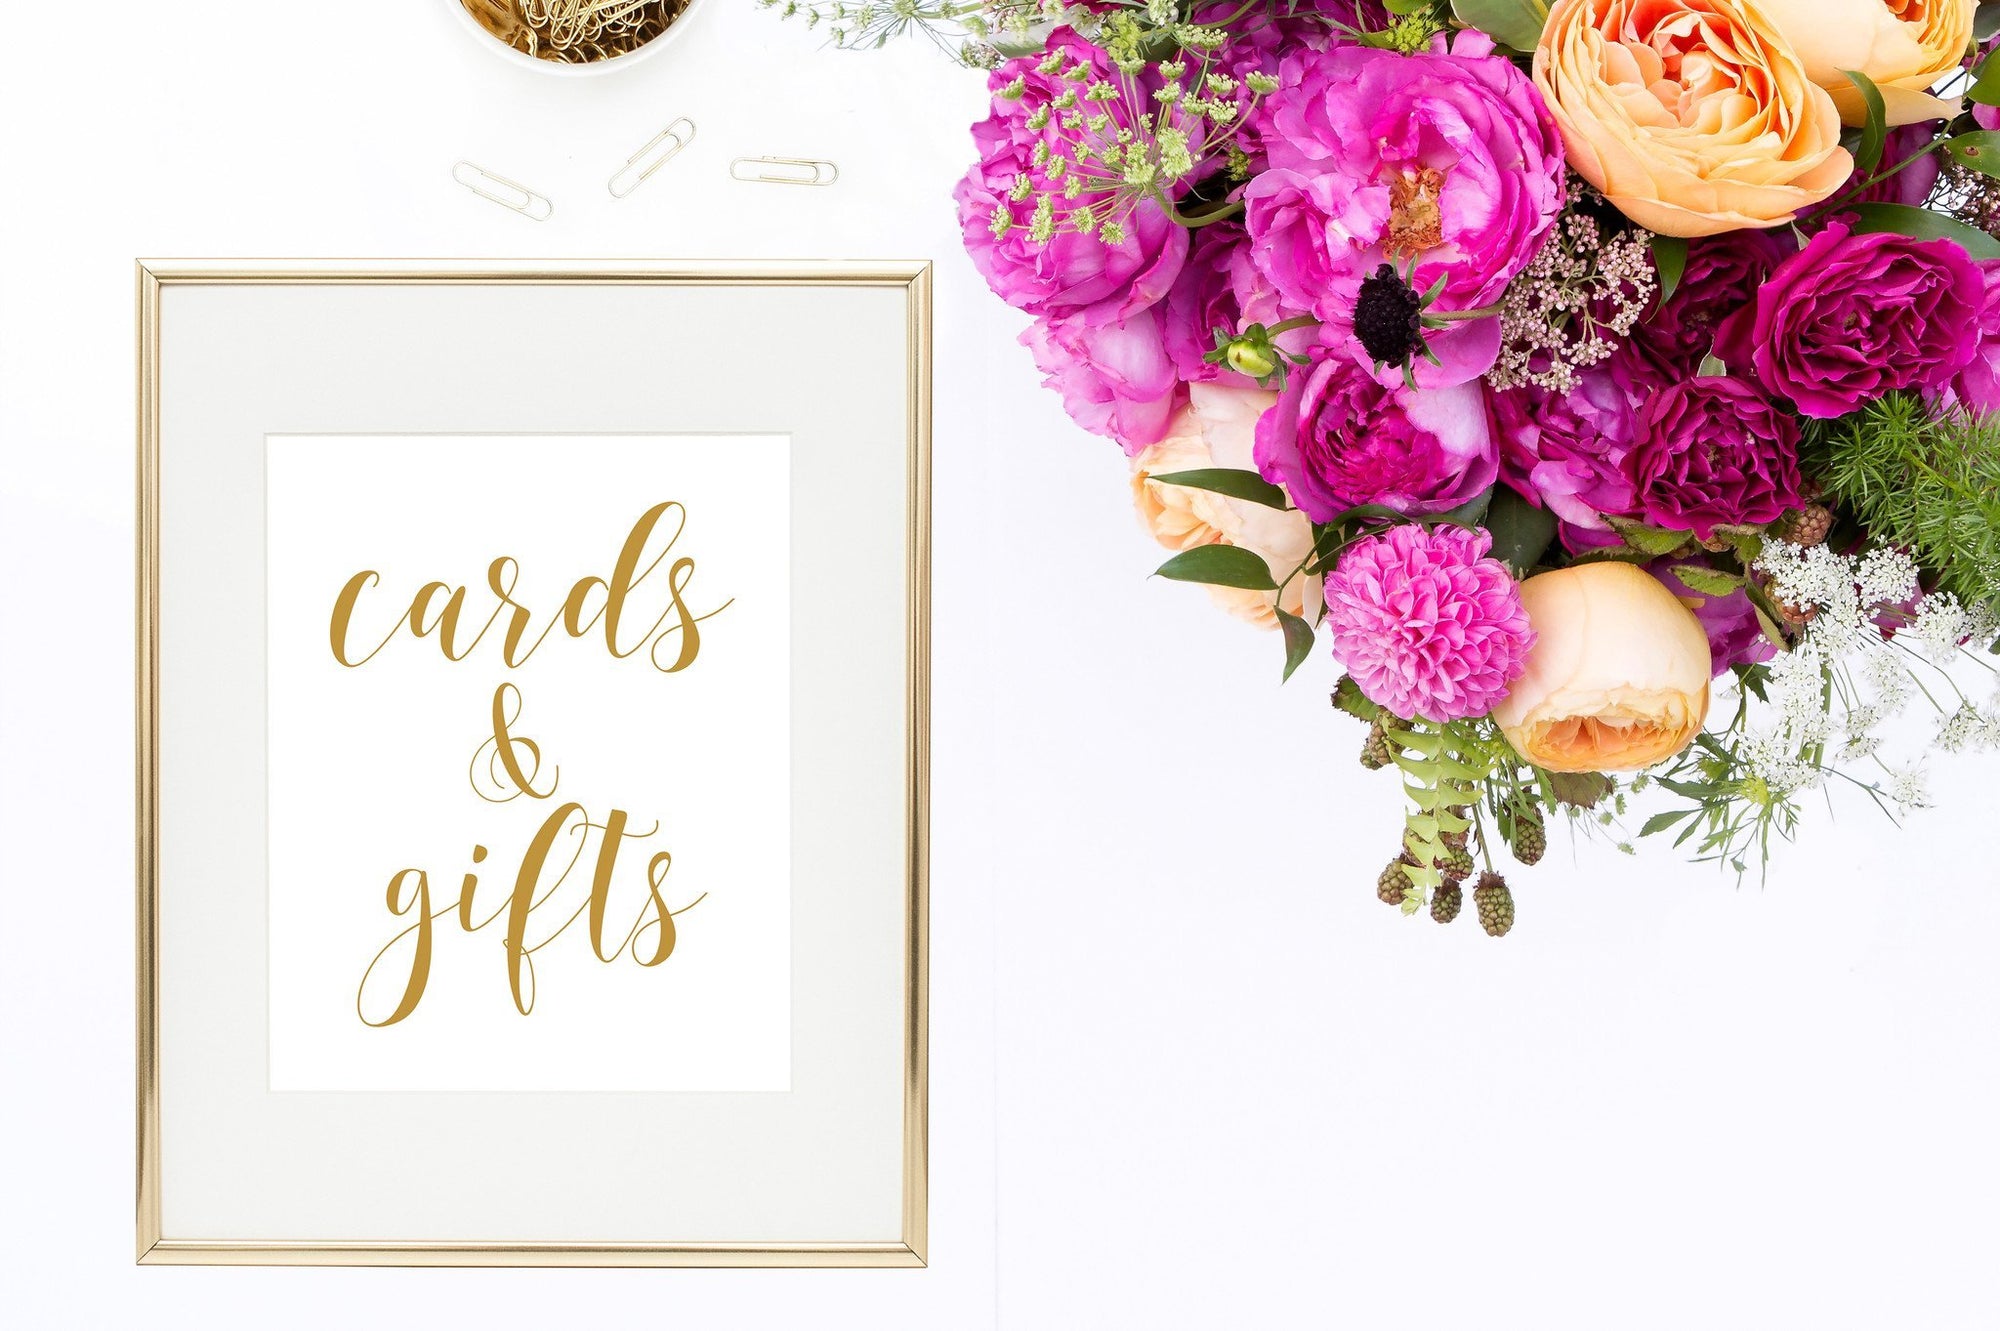 Cards & Gifts Sign - Gold Printable - Pretty Collected